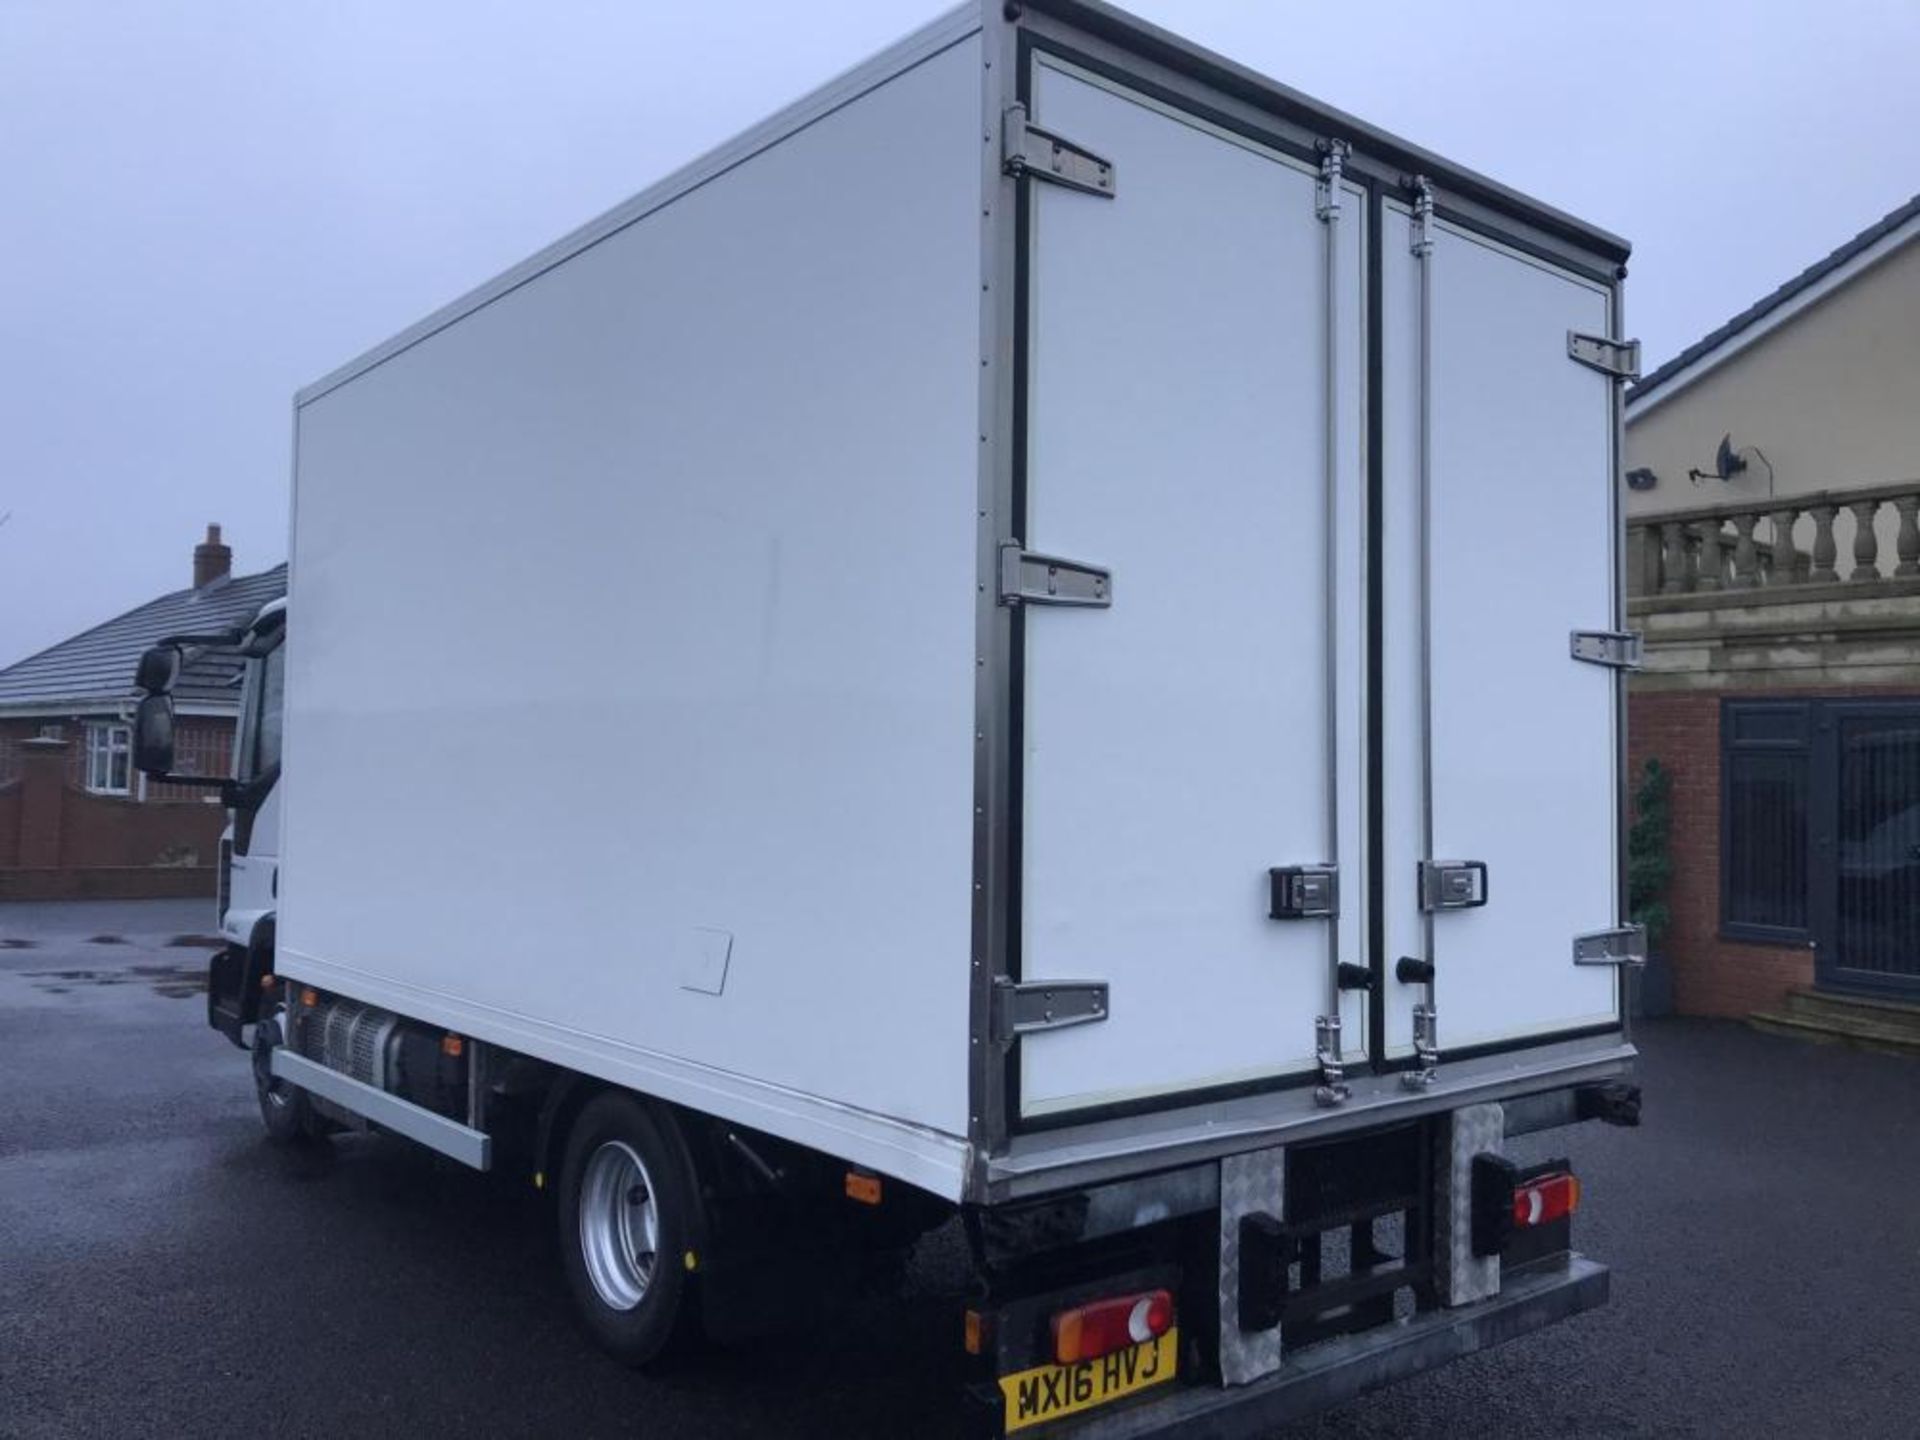 2016/16 REG IVECO EUROCARGO 75E16P REFRIGERATED LORRY EURO 6 NEW MODEL, AUTOMATIC GEARBOX *PLUS VAT* - Image 3 of 14